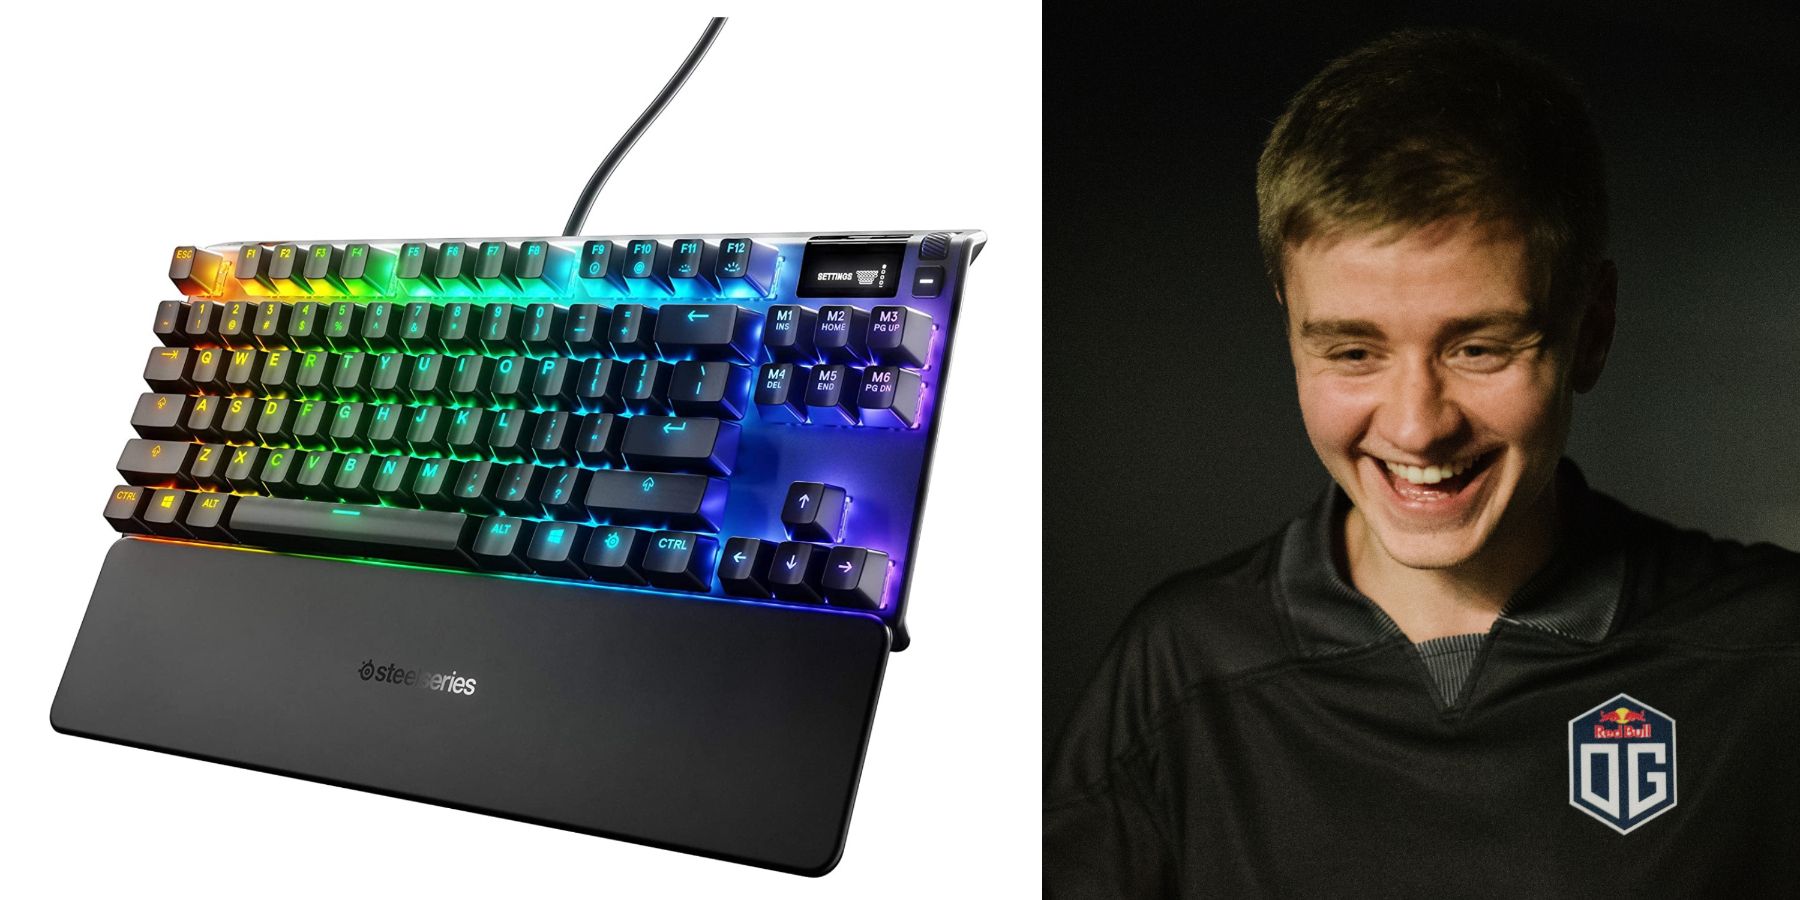 What Keyboards Do the Pros Use?